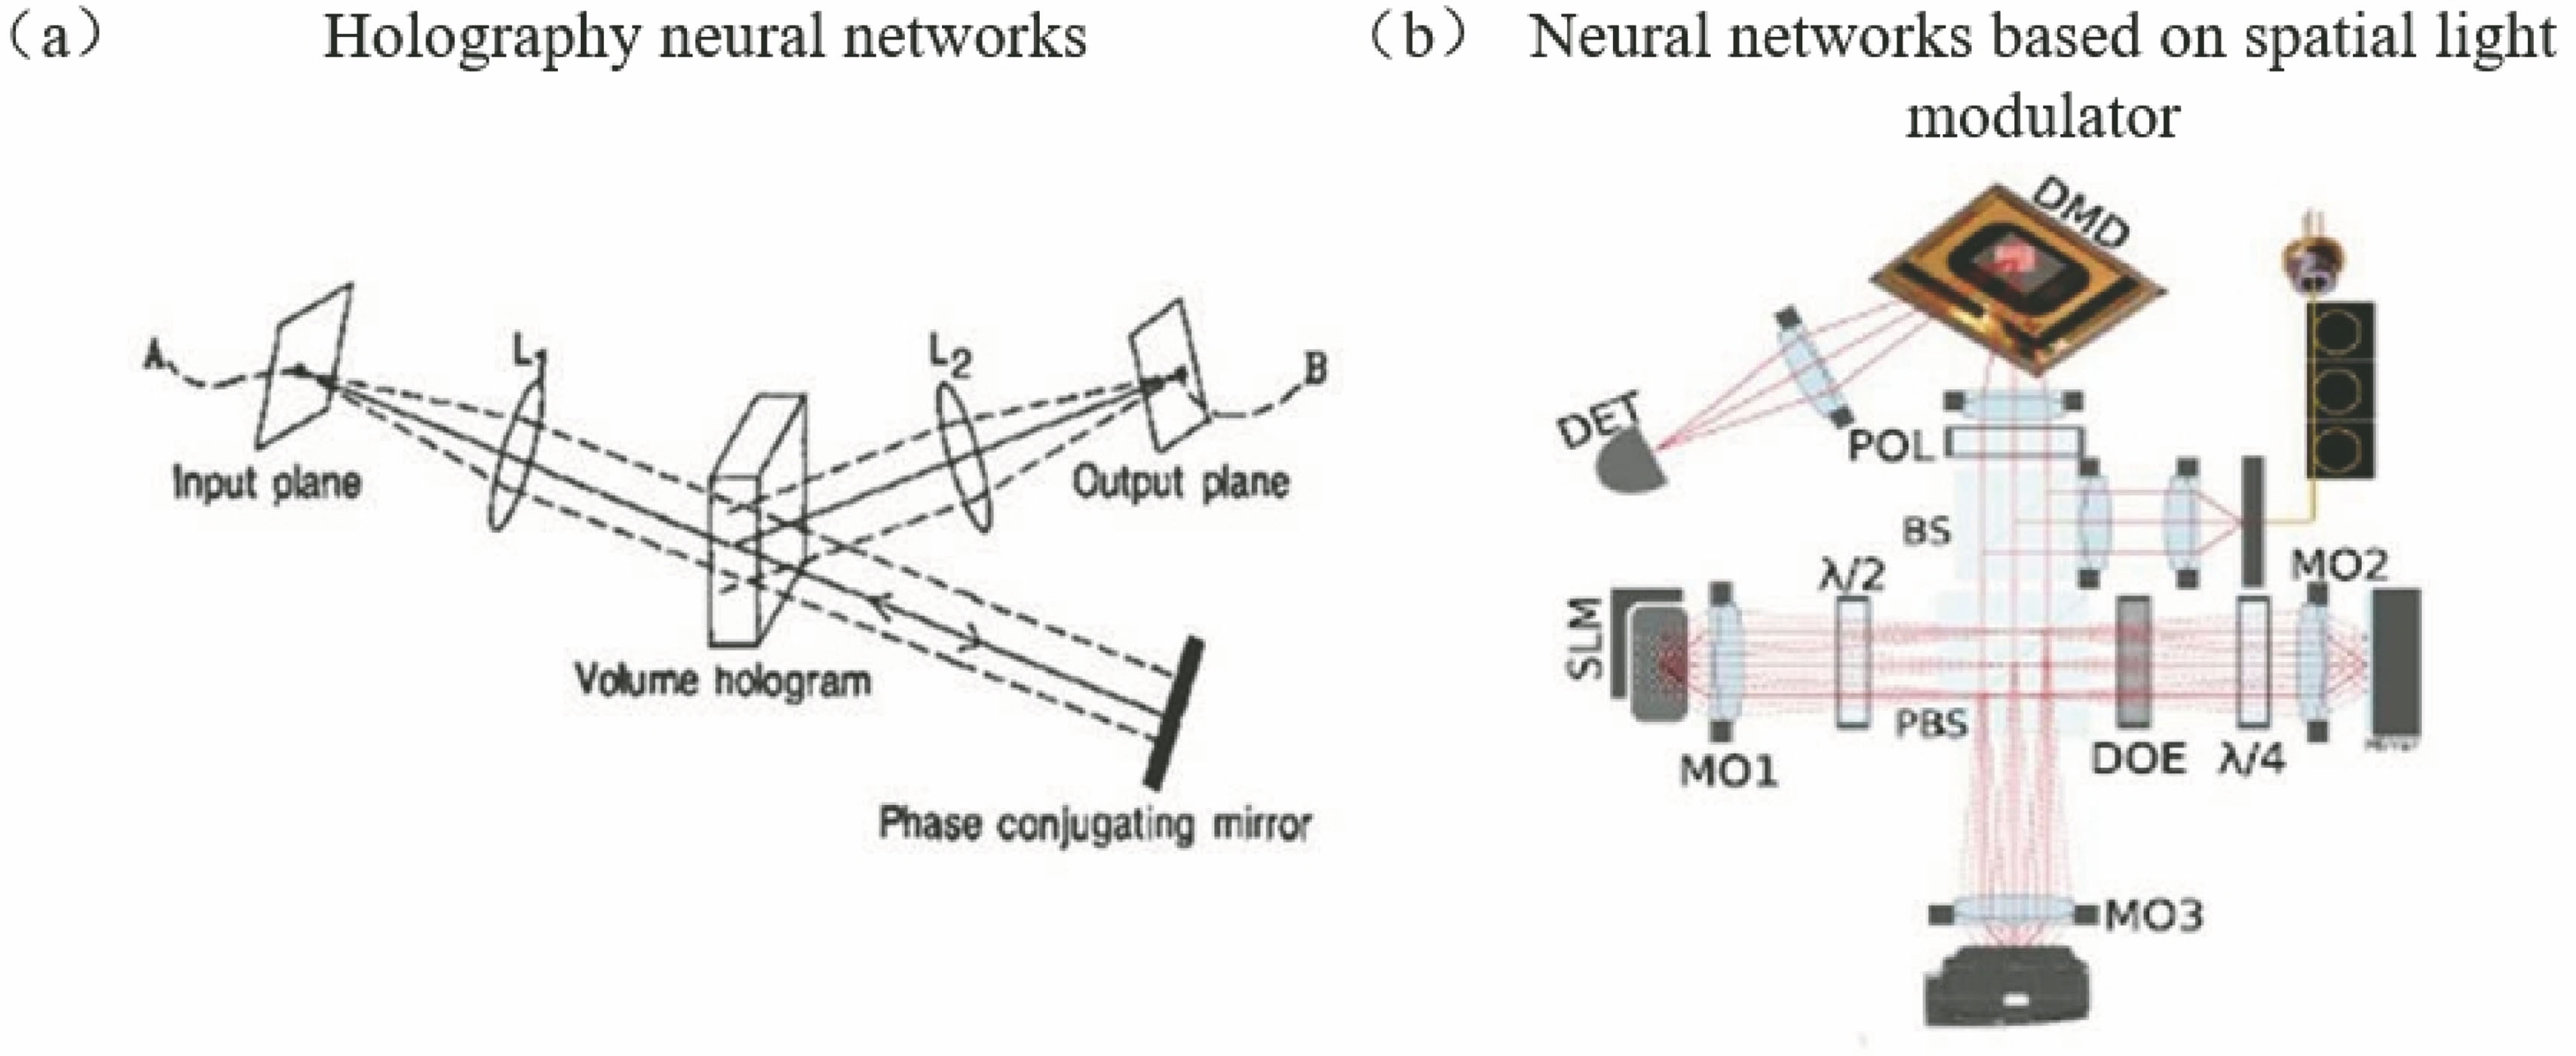 Optical neural networks based on traditional optical devices. (a) Holography neural network[32]; (b) optical neural network based on spatial light modulator[34]